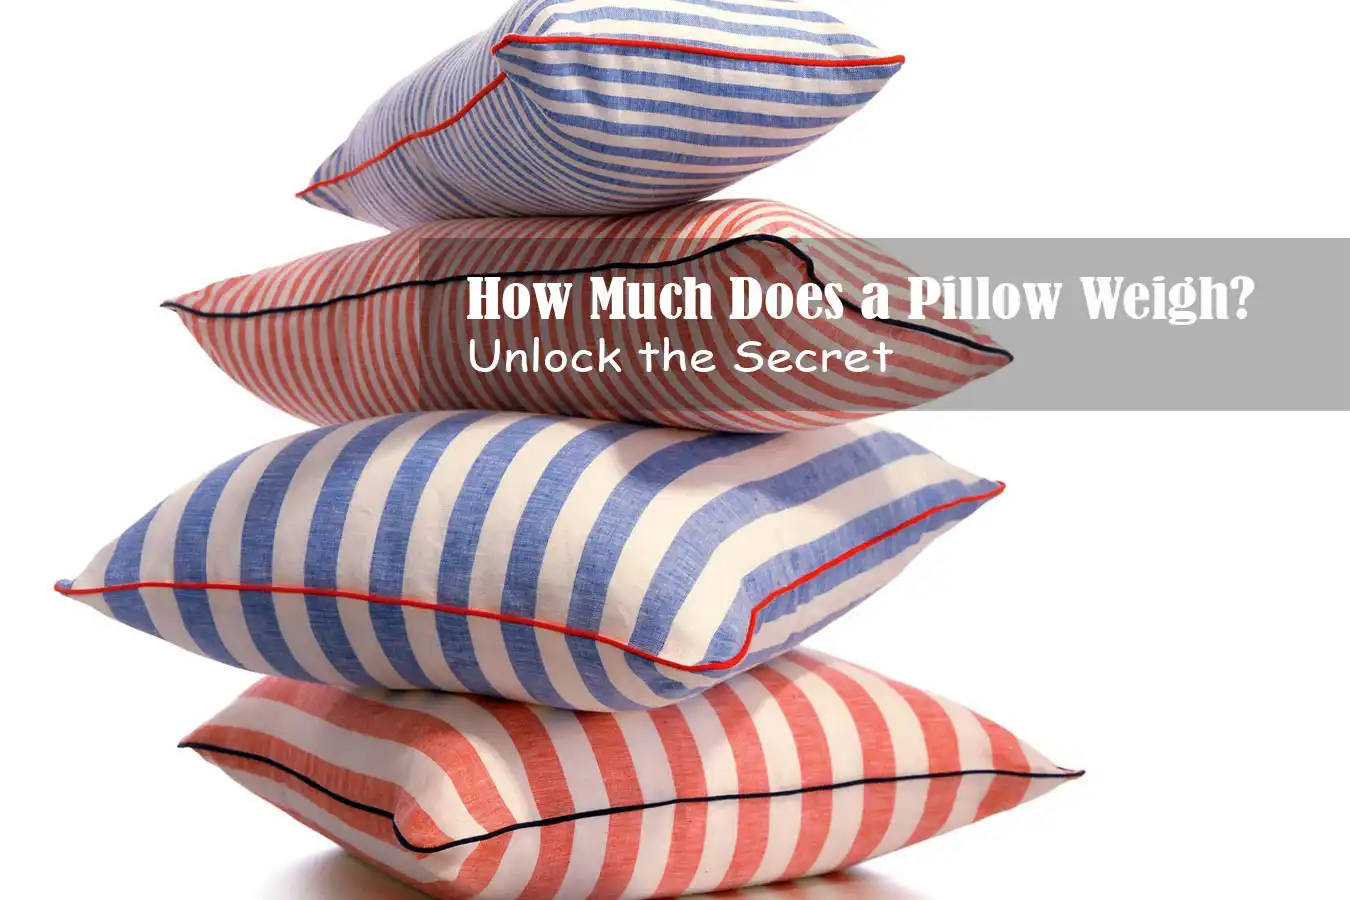 How Much Does a Pillow Weigh